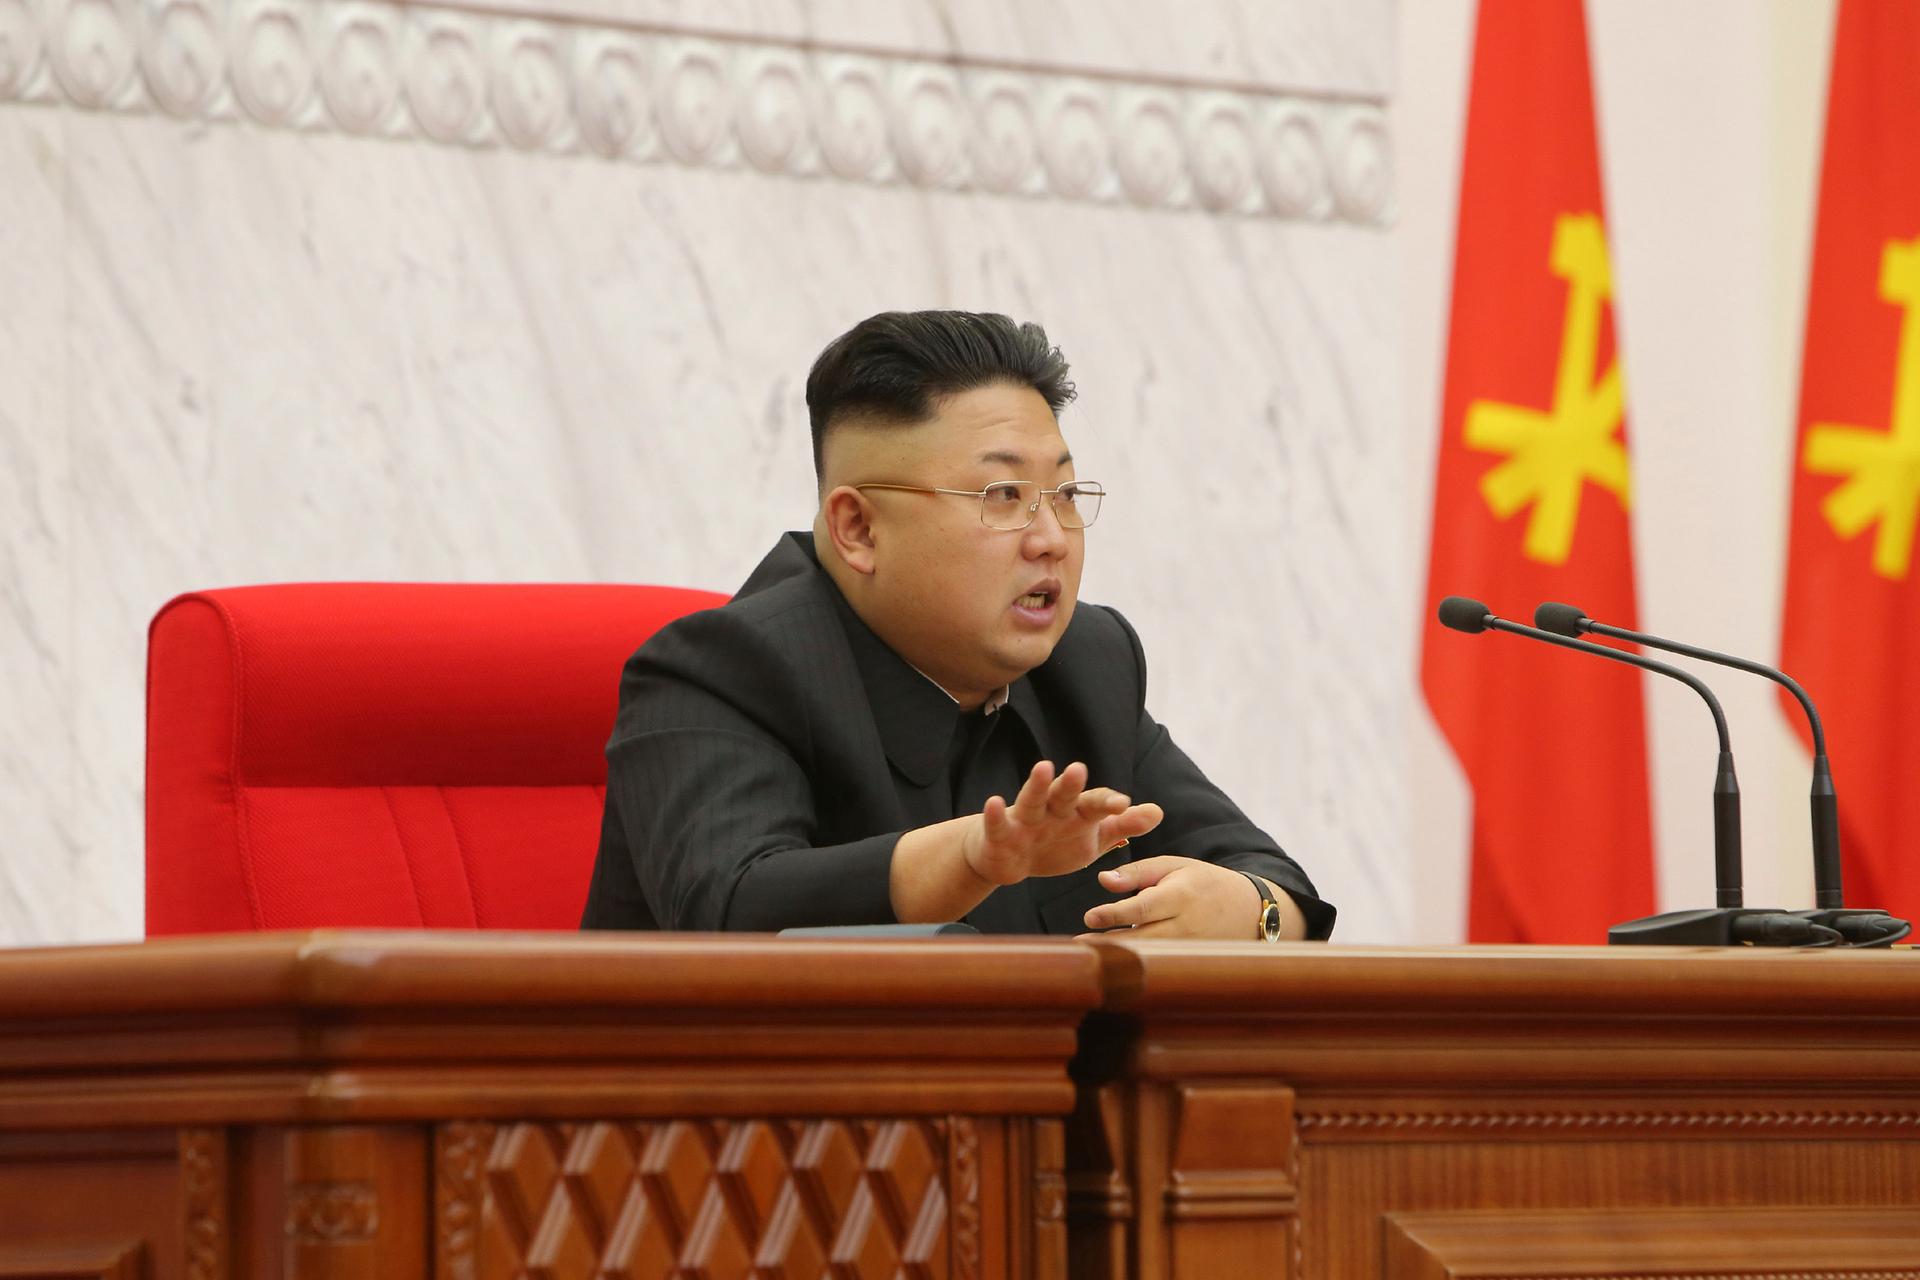 North Korean leader Kim Jong-un presides over a meeting of the Political Bureau of the Workers' Party of Korea's Central Committee in this undated photo released by North Korea's Korean Central News Agency (KCNA) in Pyongyang April 9, 2014.